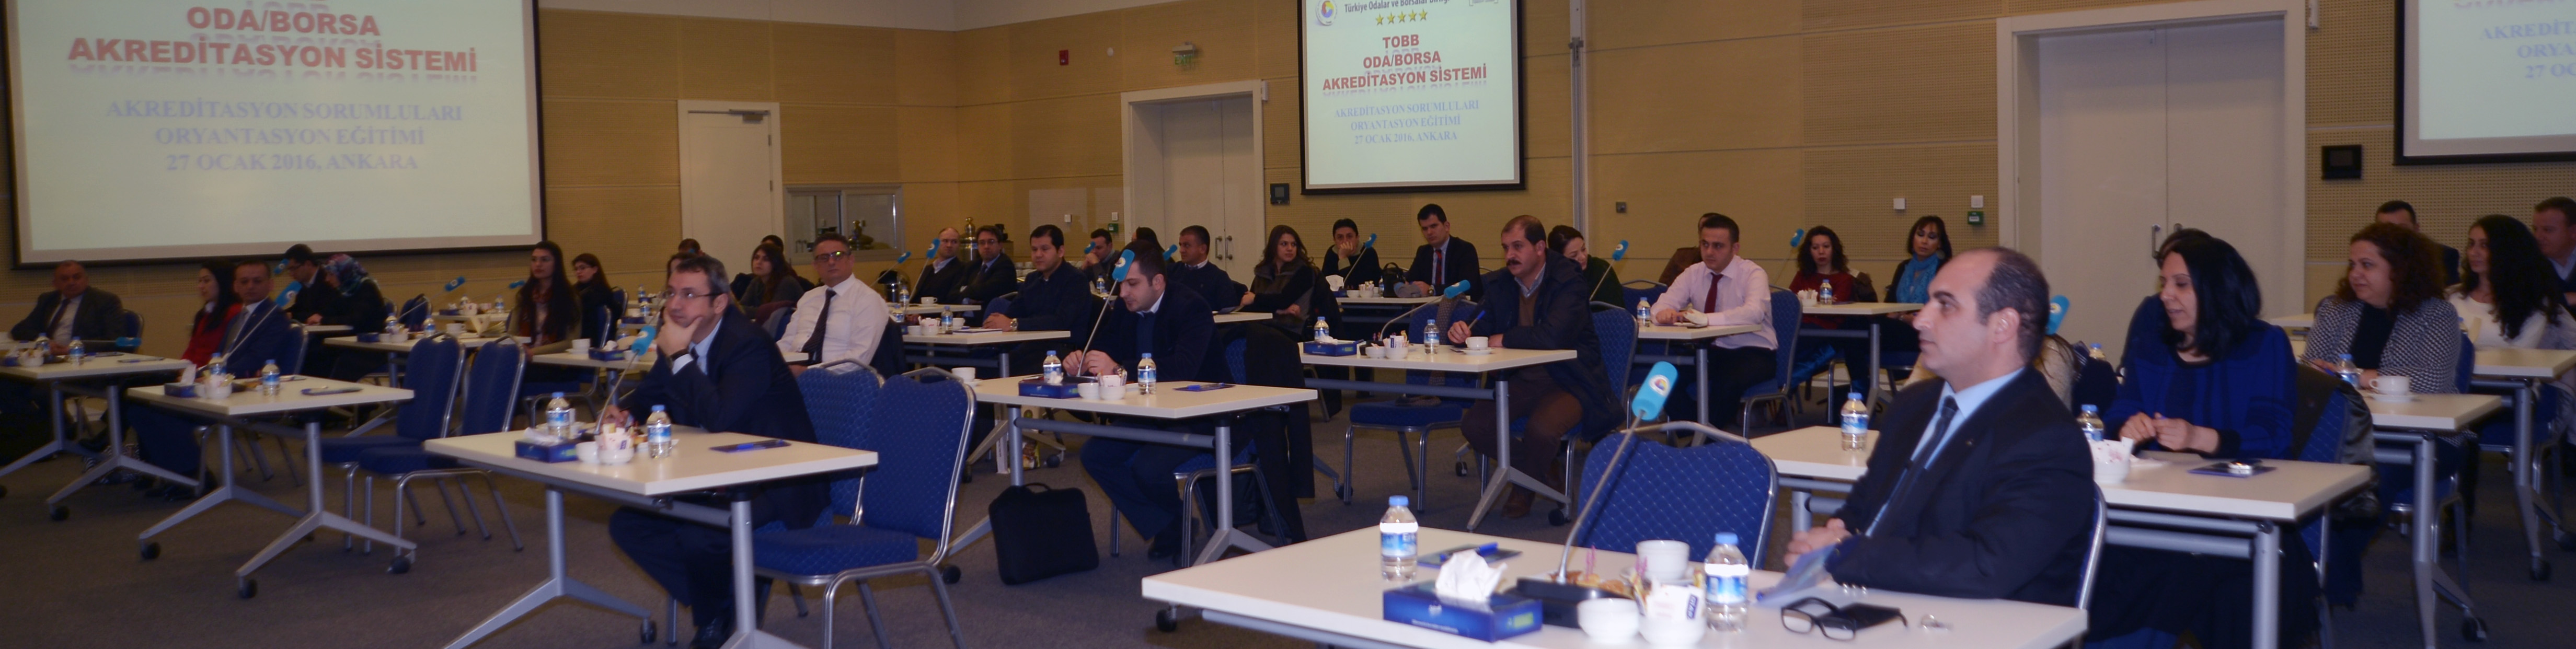 KIZILTEPE CHAMBER OF COMMERCE and INDUSTRY ATTENDED CUSTOMER SATISFACTION TRAINING